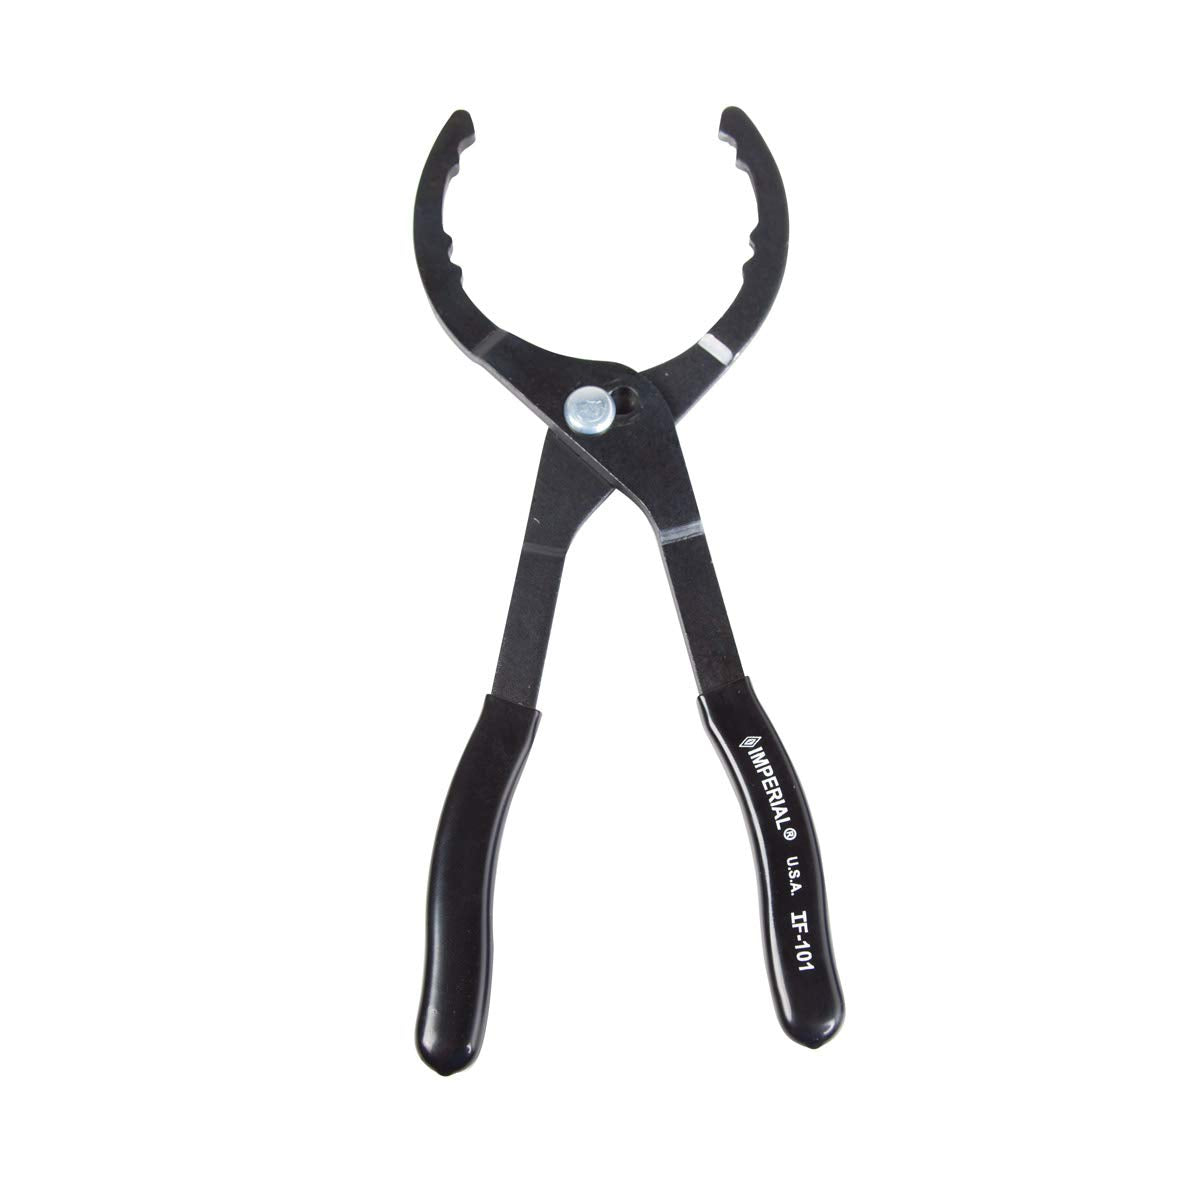 Imperial Tool IF101 Oil Filter Pliers for sizes 62mm to 110mm